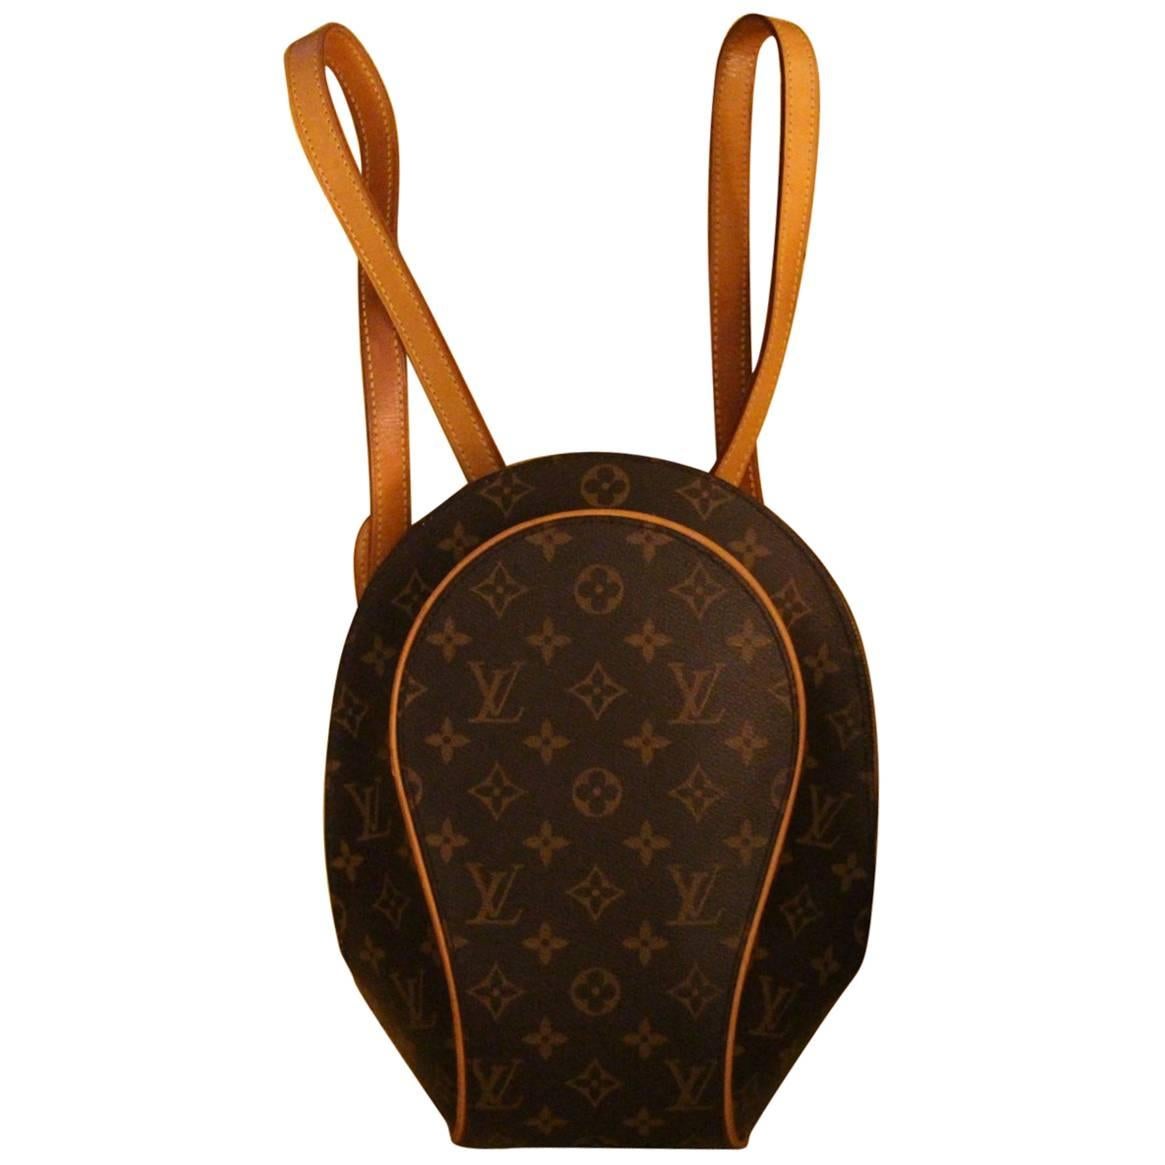 Small Louis Vuitton Backpack Monogramm Bag